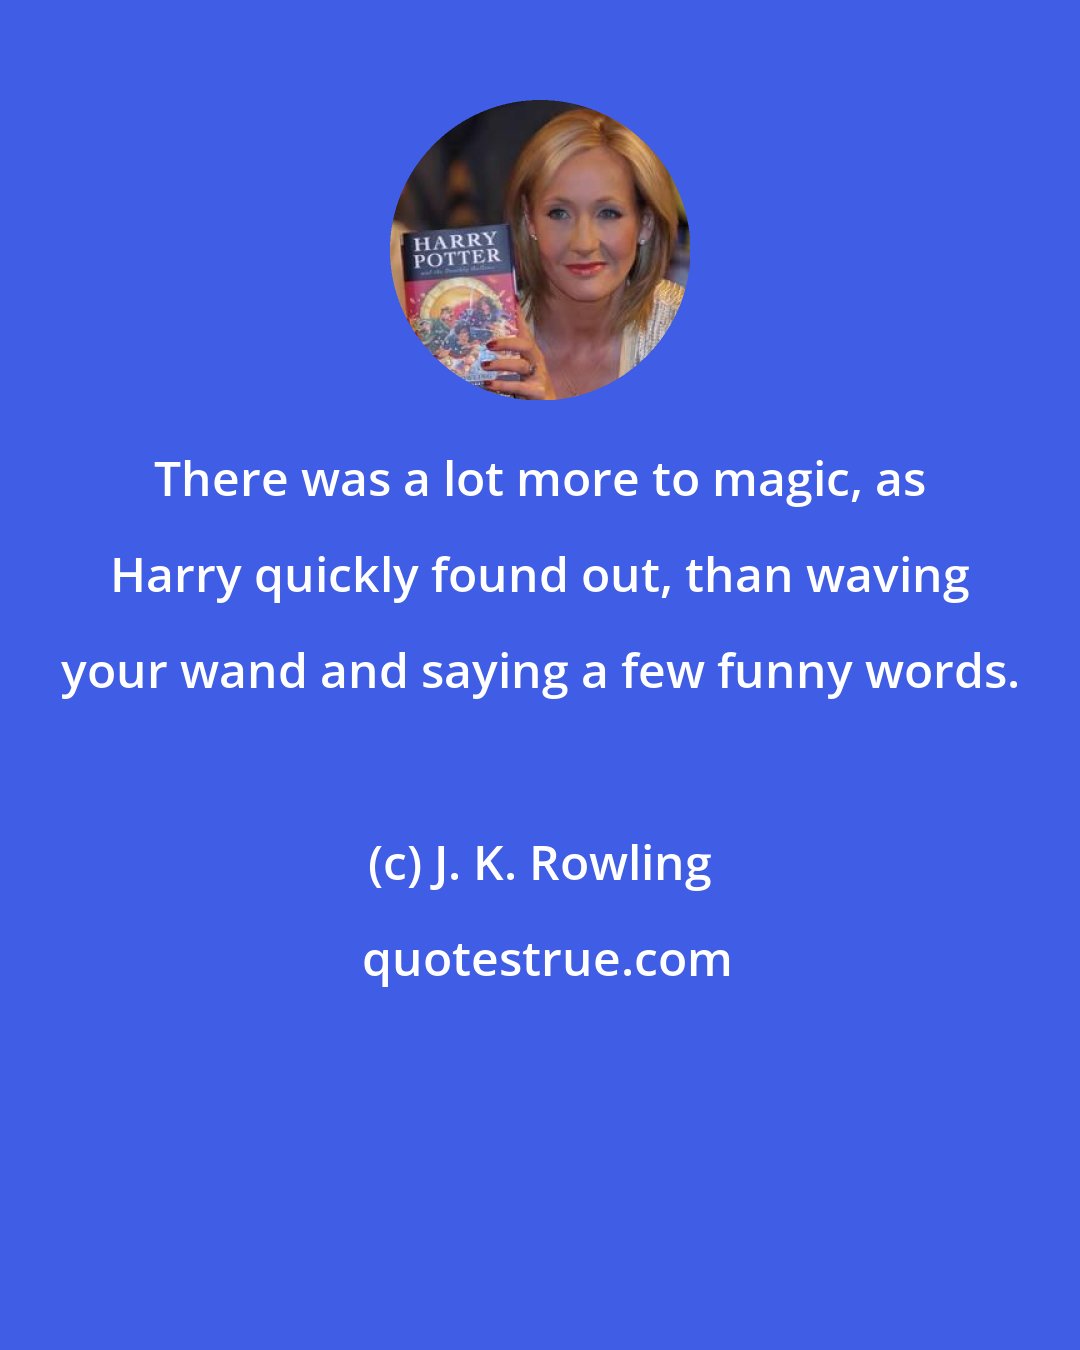 J. K. Rowling: There was a lot more to magic, as Harry quickly found out, than waving your wand and saying a few funny words.